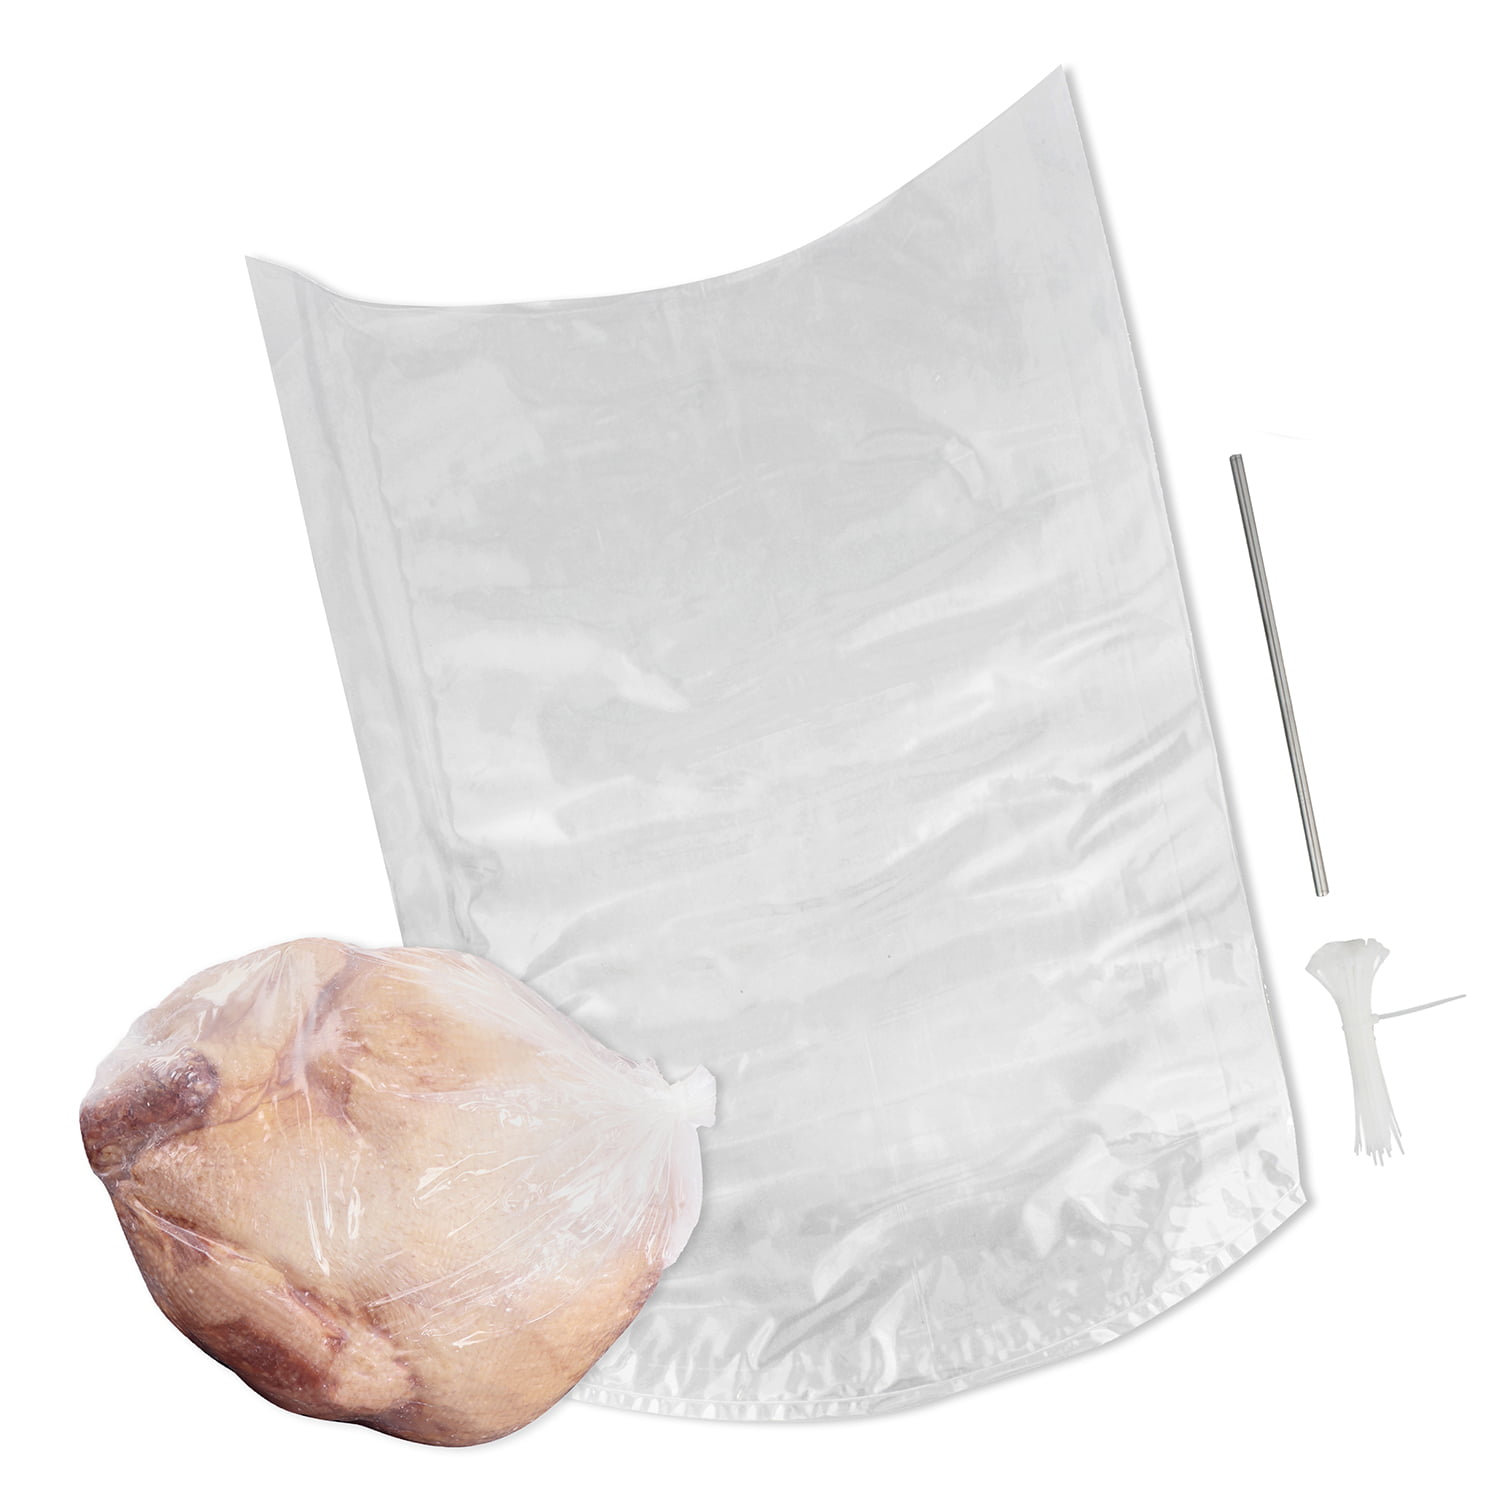 Food Grade Poultry Shrink Bags 10” X 20” Qty 50 